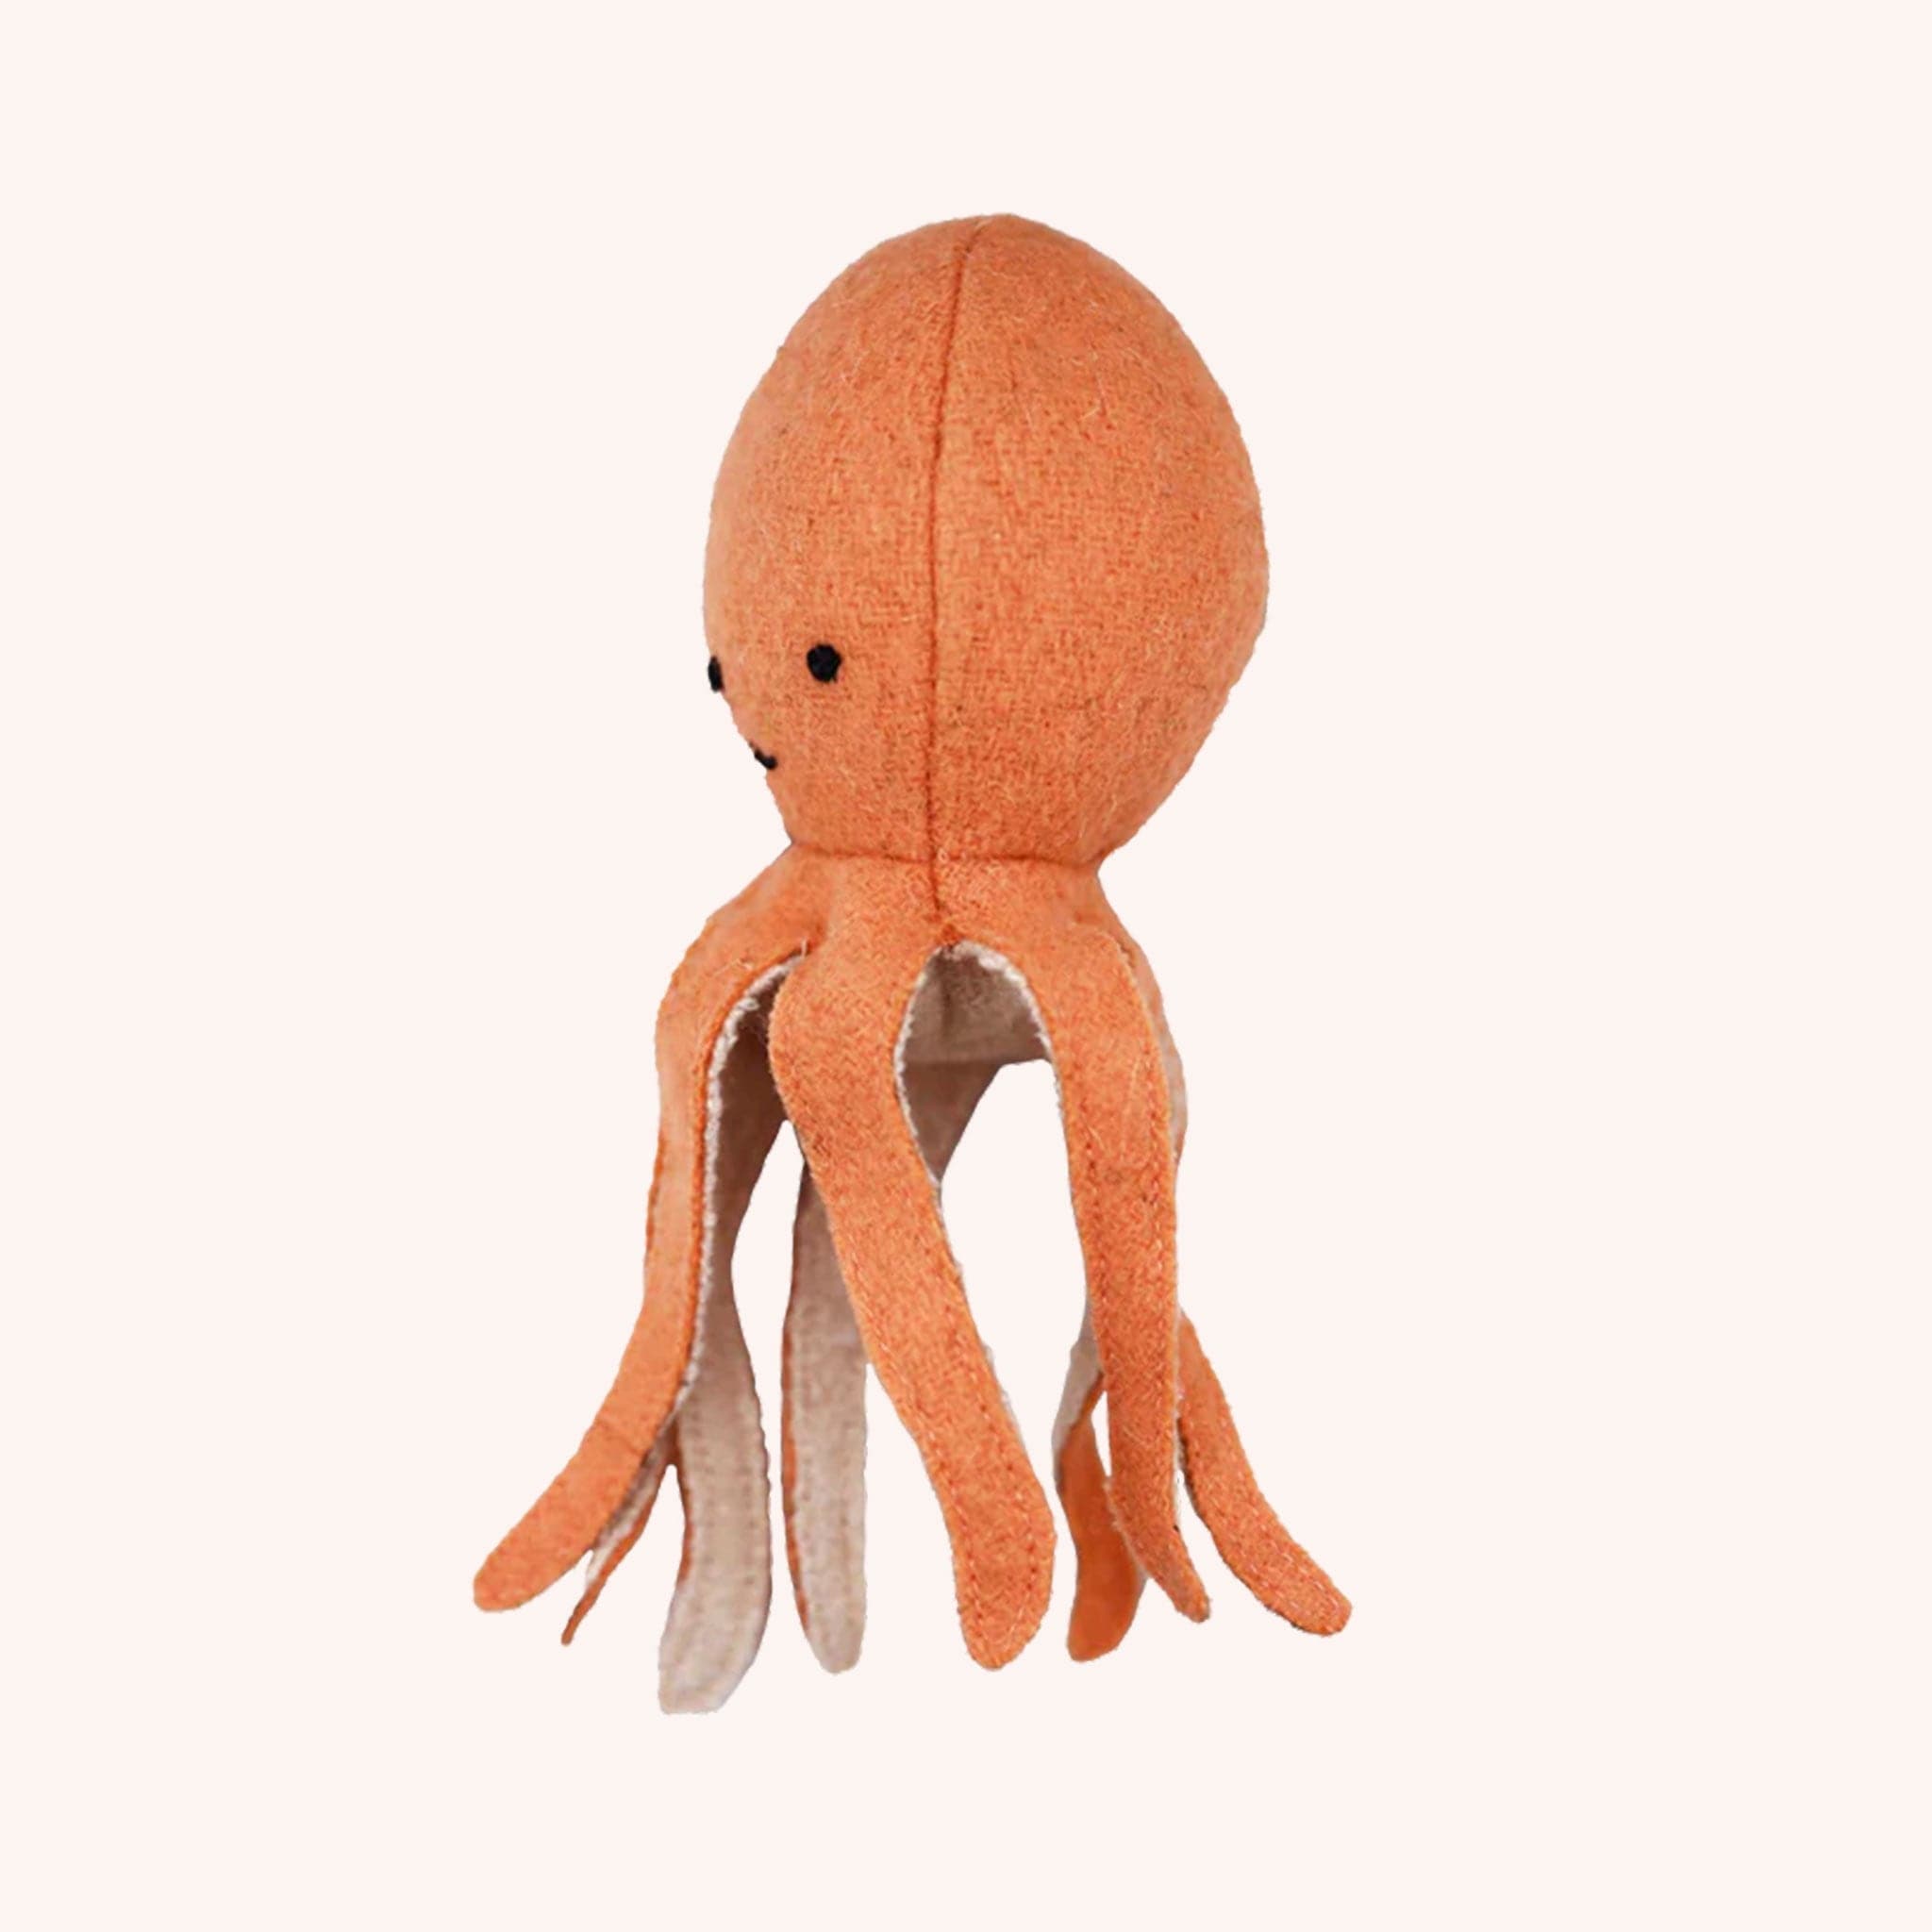 An orange octopus stuffed toy with eight dangling tentacles and a smiling face.